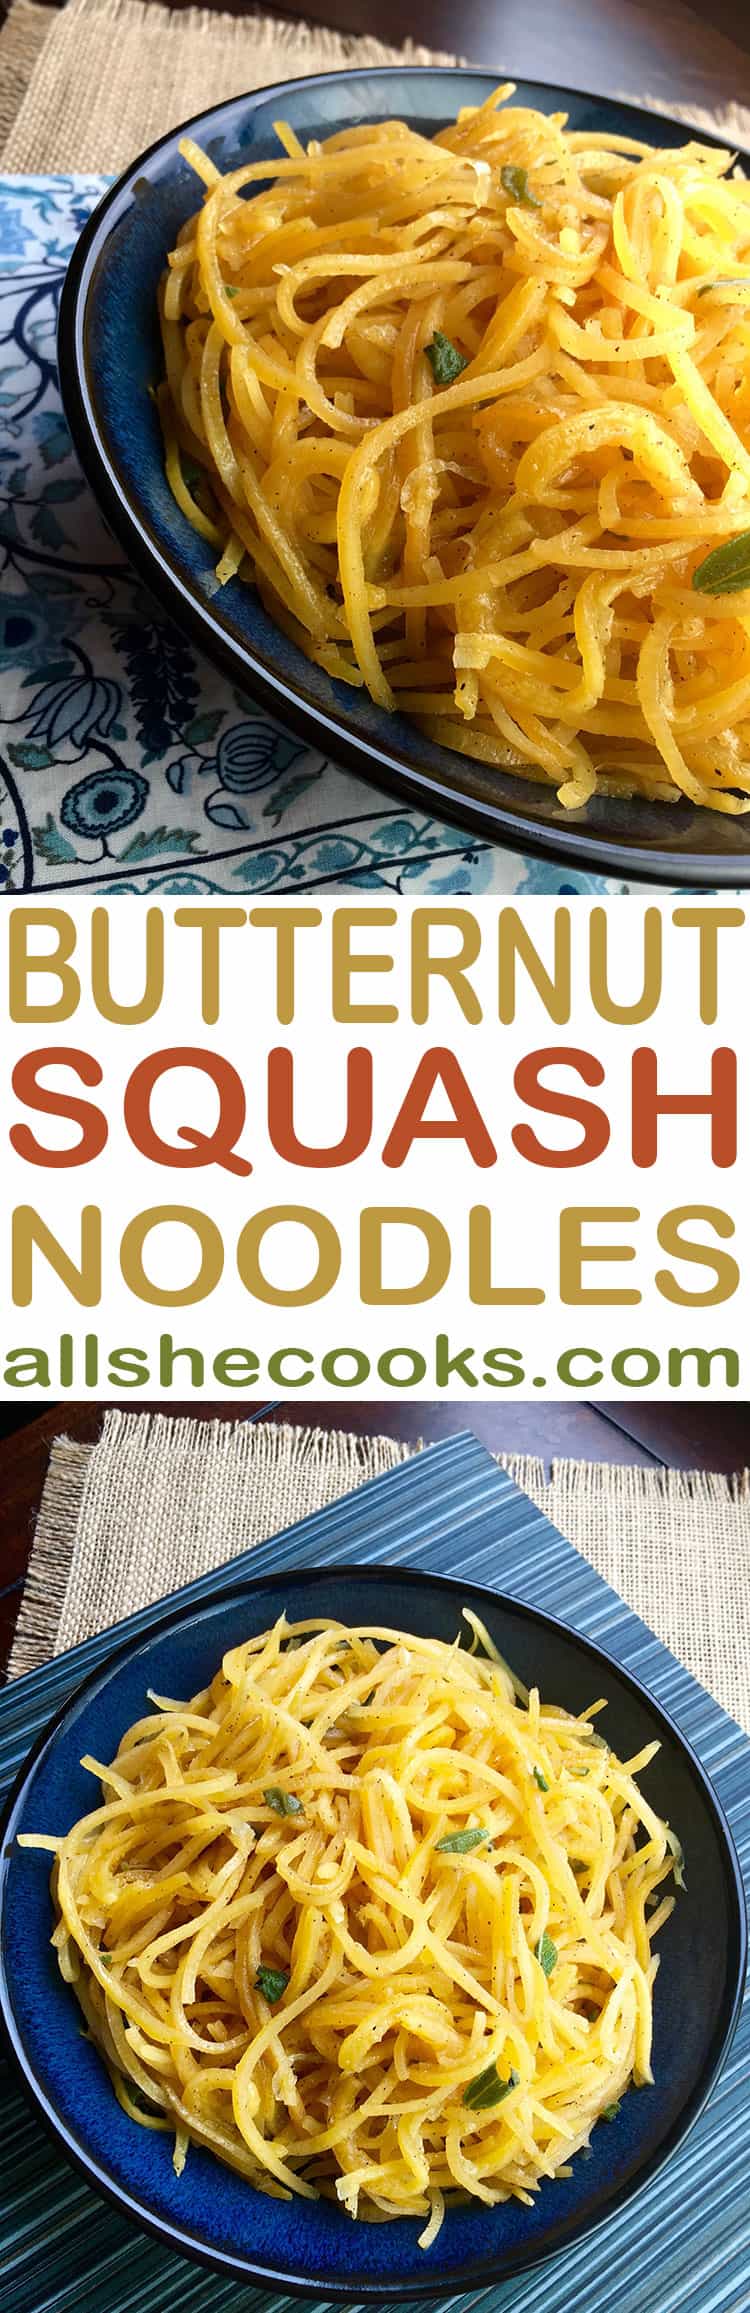 Want to eat pasta but counting your calories? Need an eggless noodle? Butternut Squash Noodles are so delicious, easy to make and good for you.